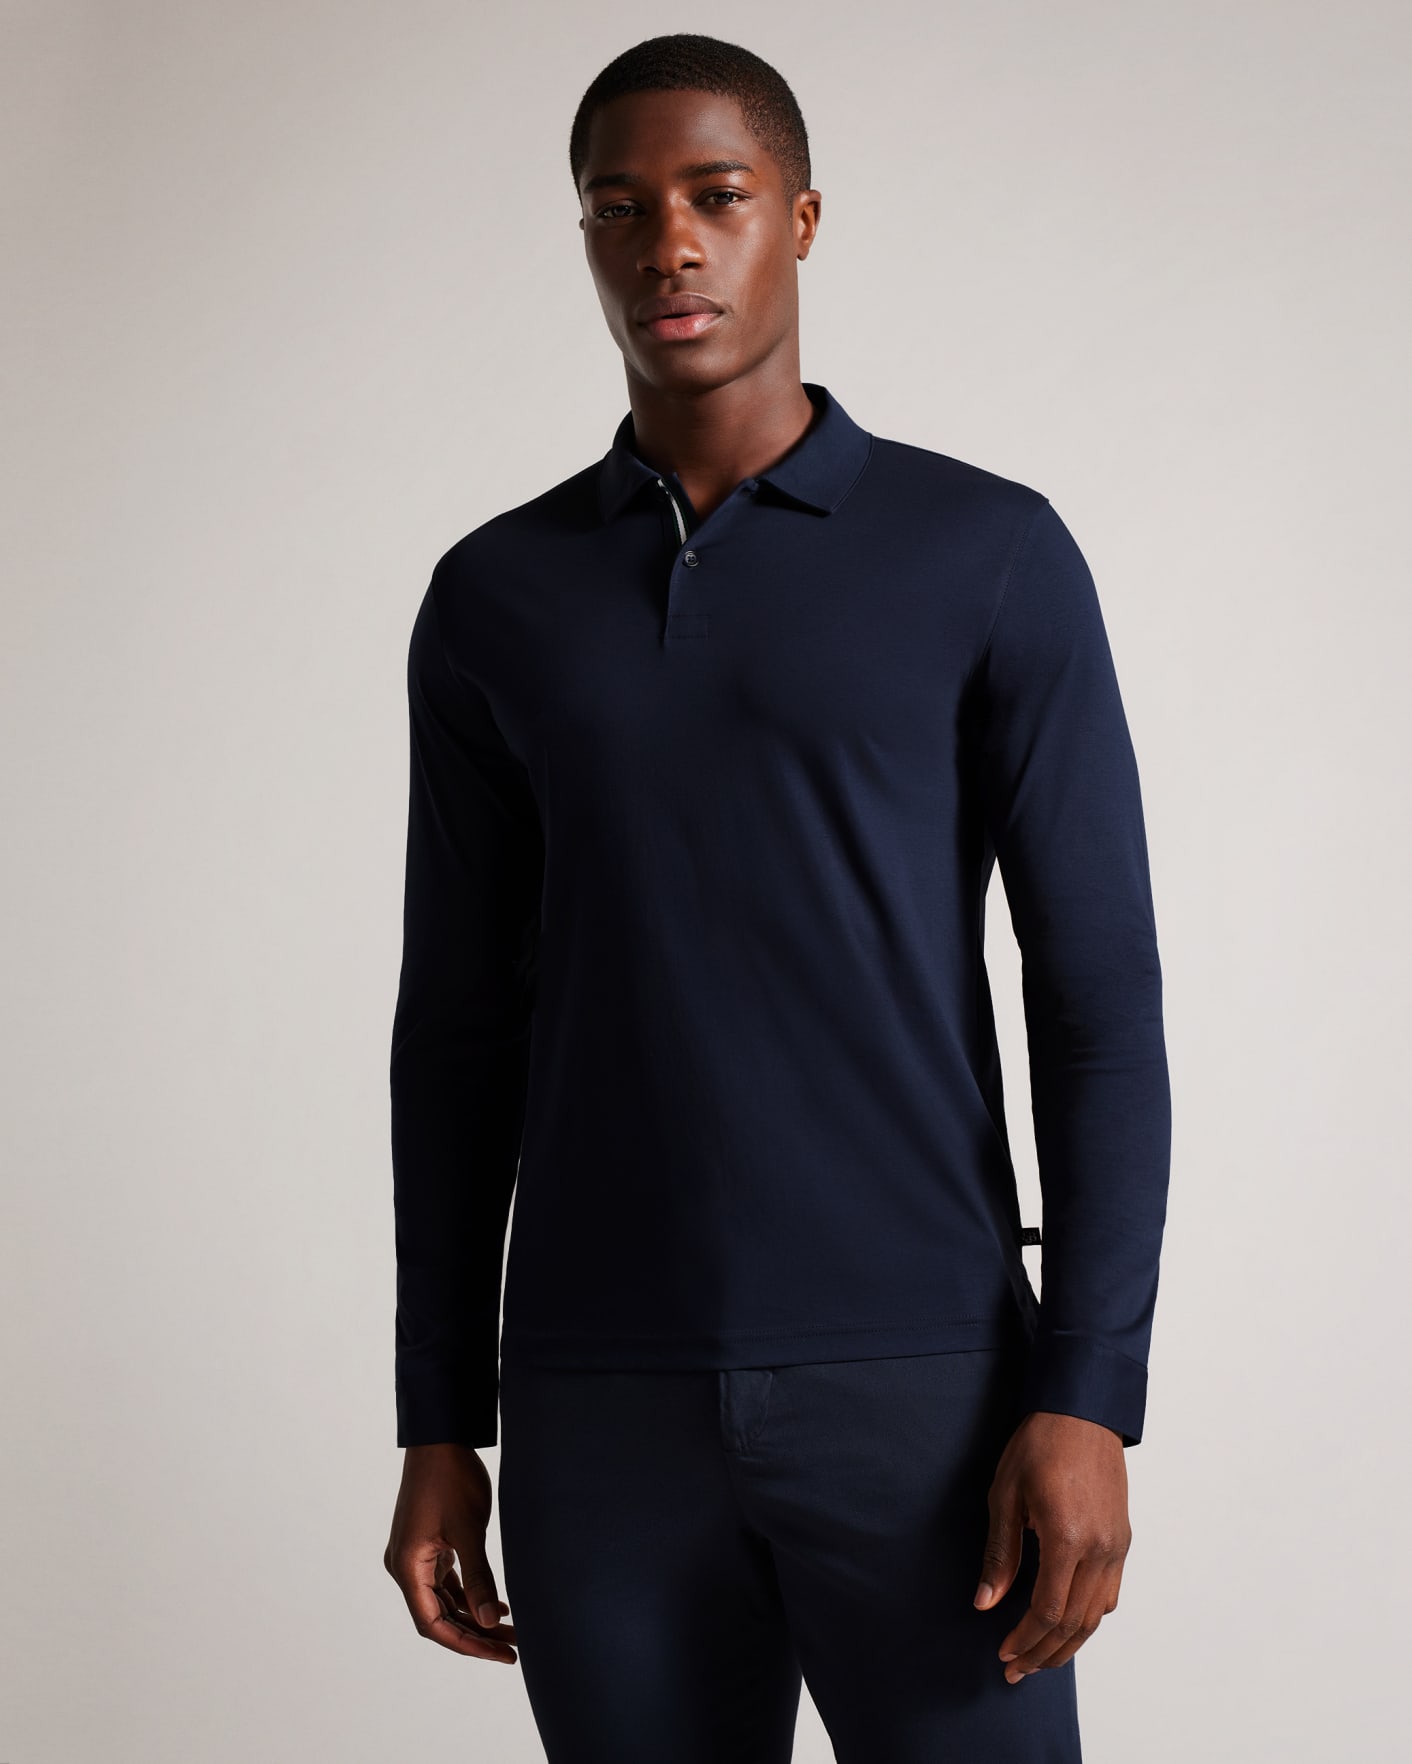 TOLER - NAVY | Tops & T-Shirts | Ted Baker ROW